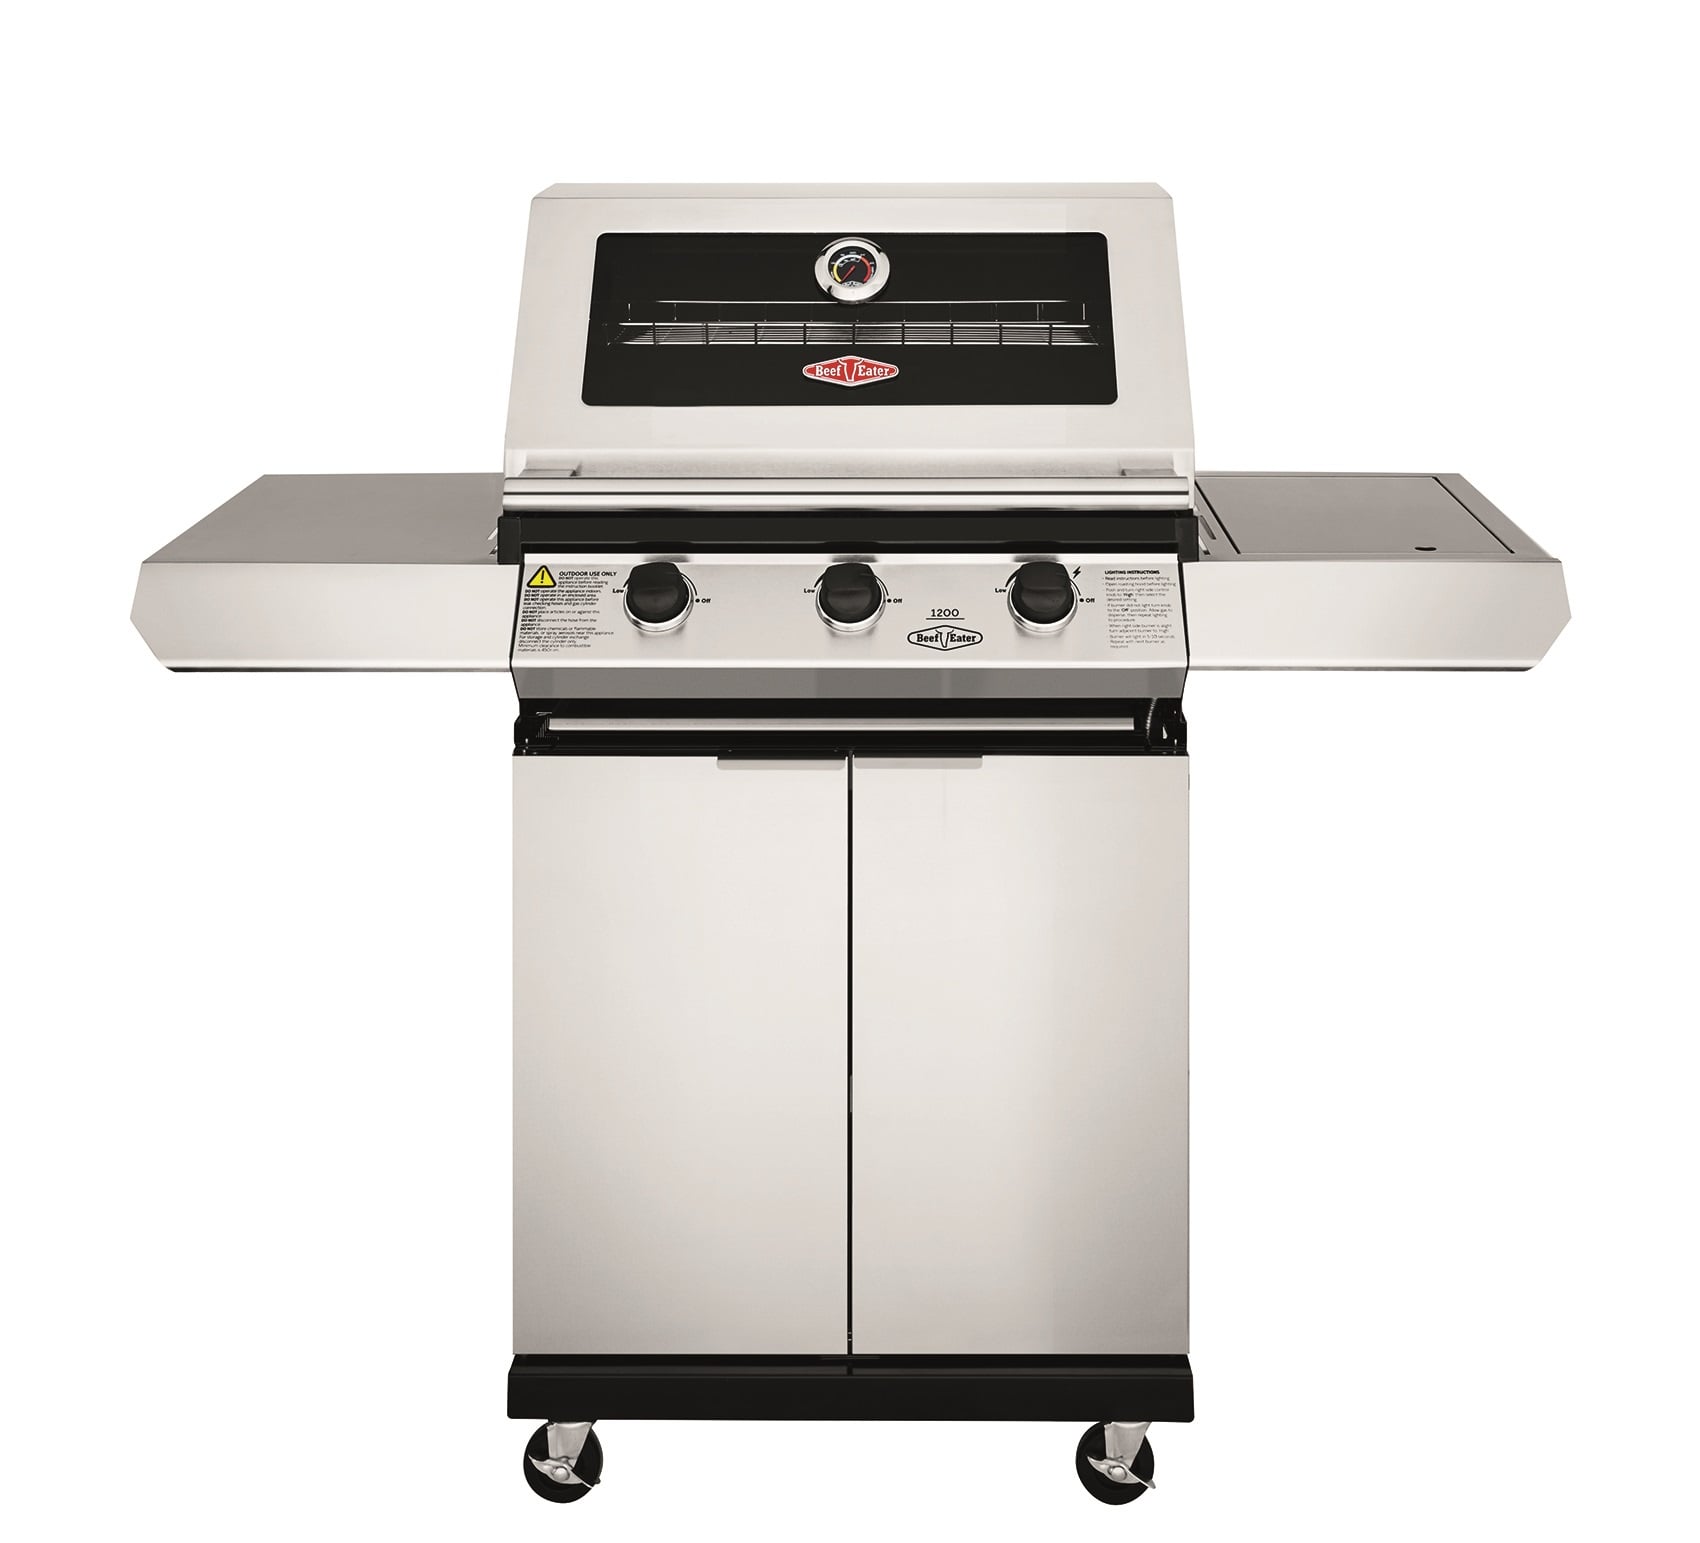 Beefeater 1200S Series - 3 Burner Freestanding Gas Barbecue